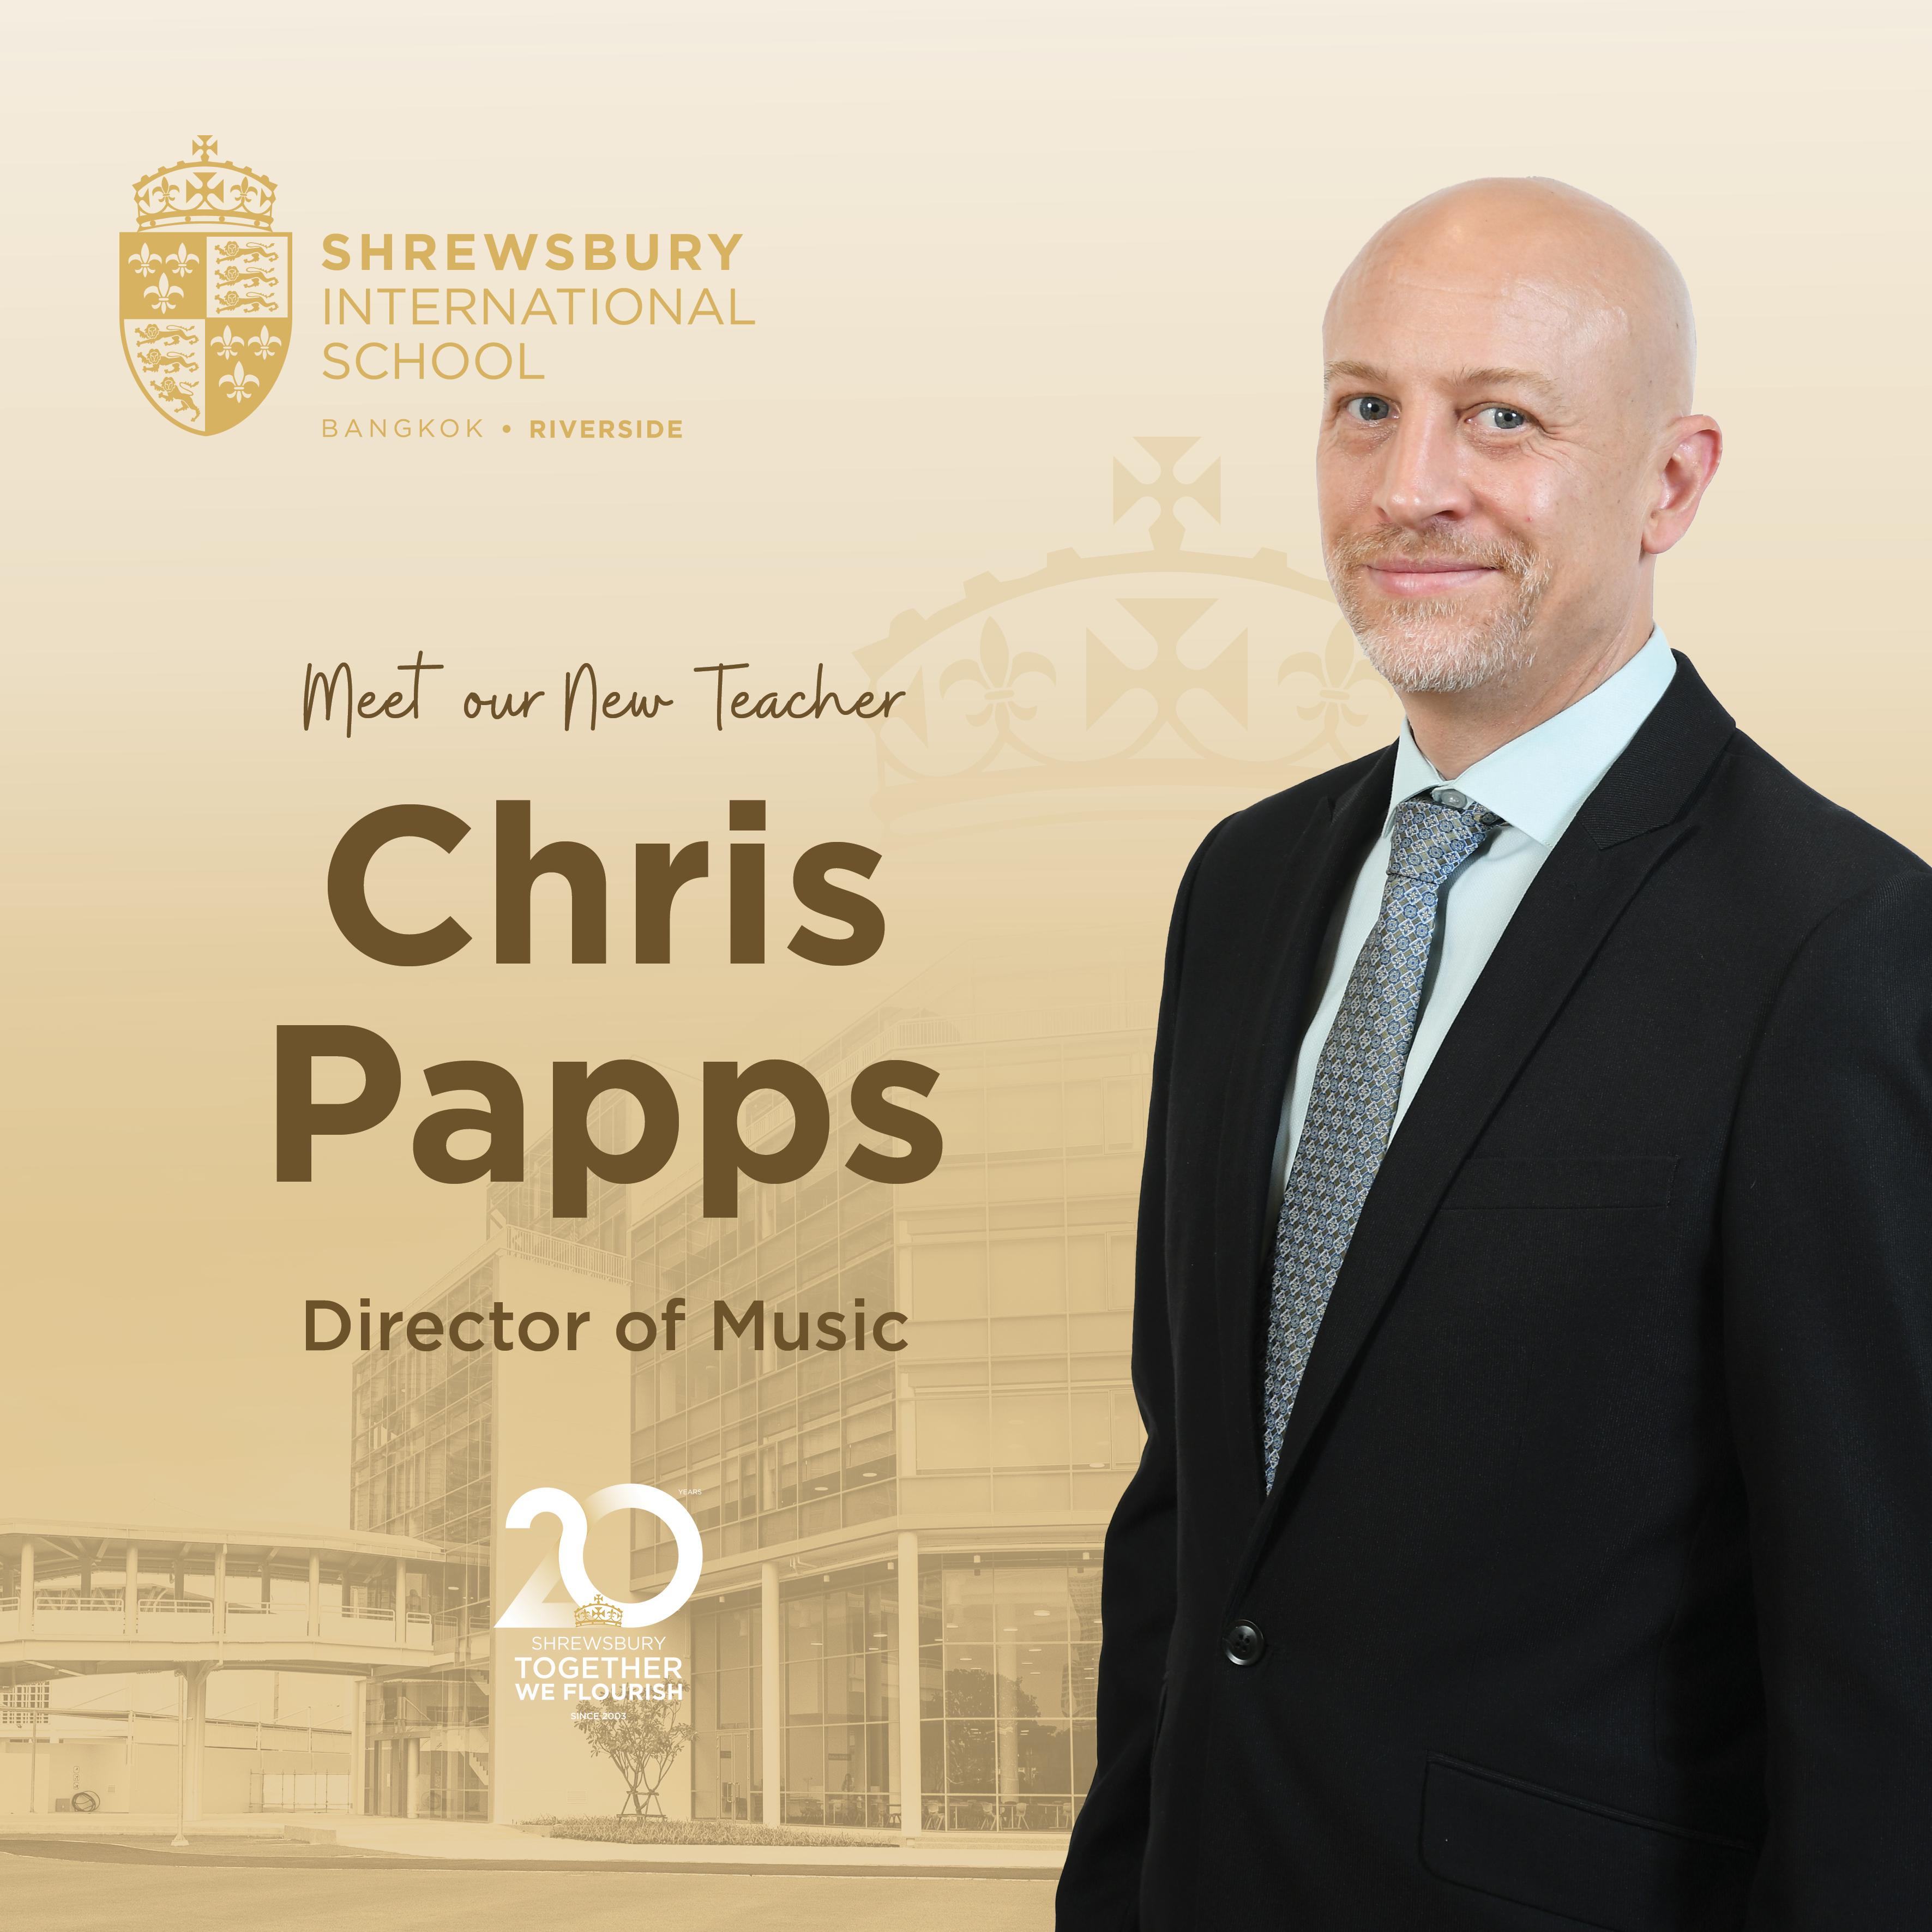 Shrewsbury Extends a Warm Welcome to Chris Papps, New Director of Music